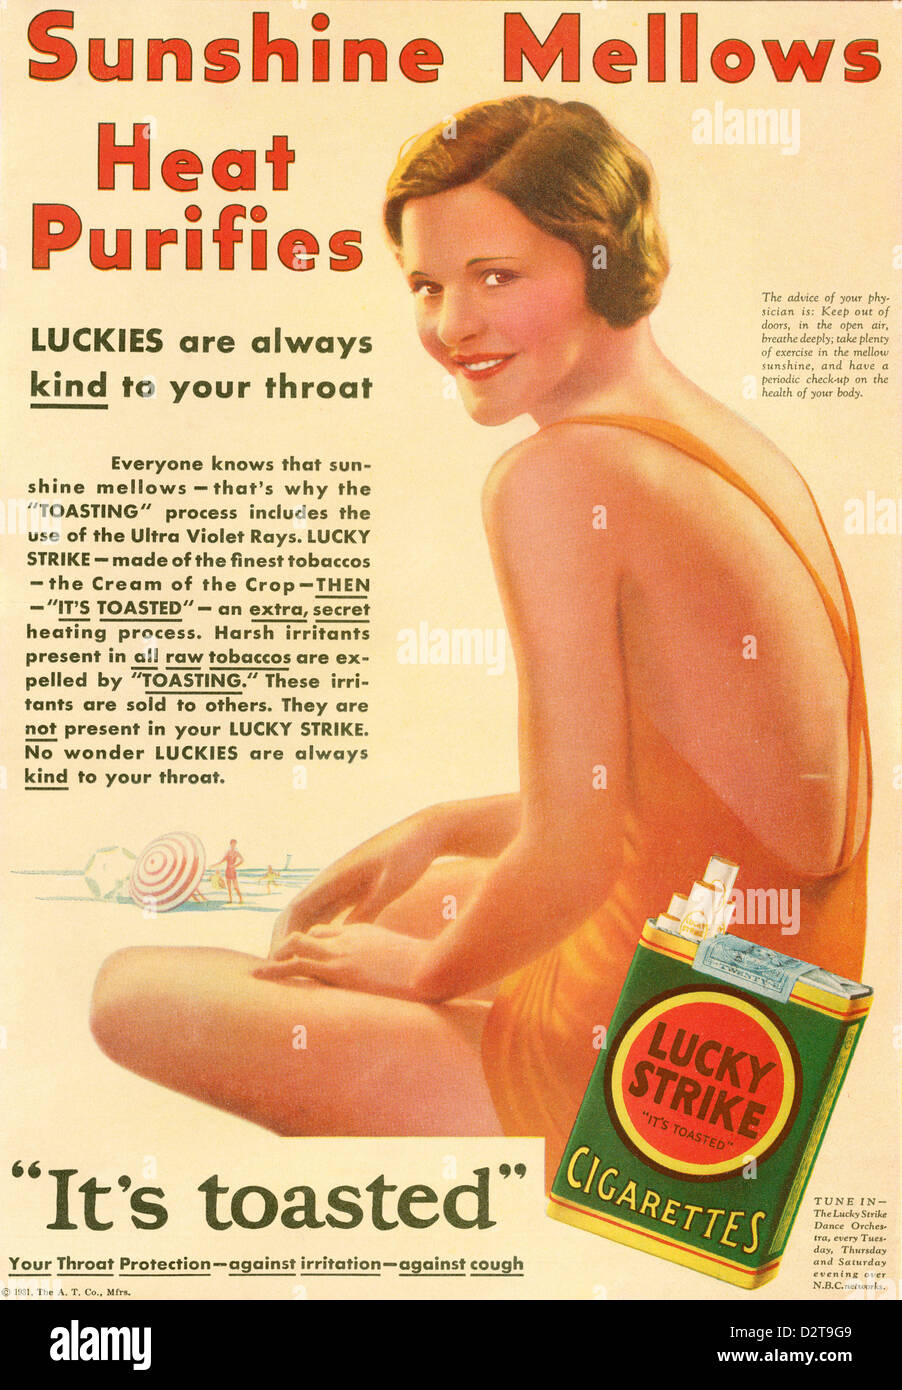 A 1930's advertisement for Lucky Strike cigarettes. Stock Photo